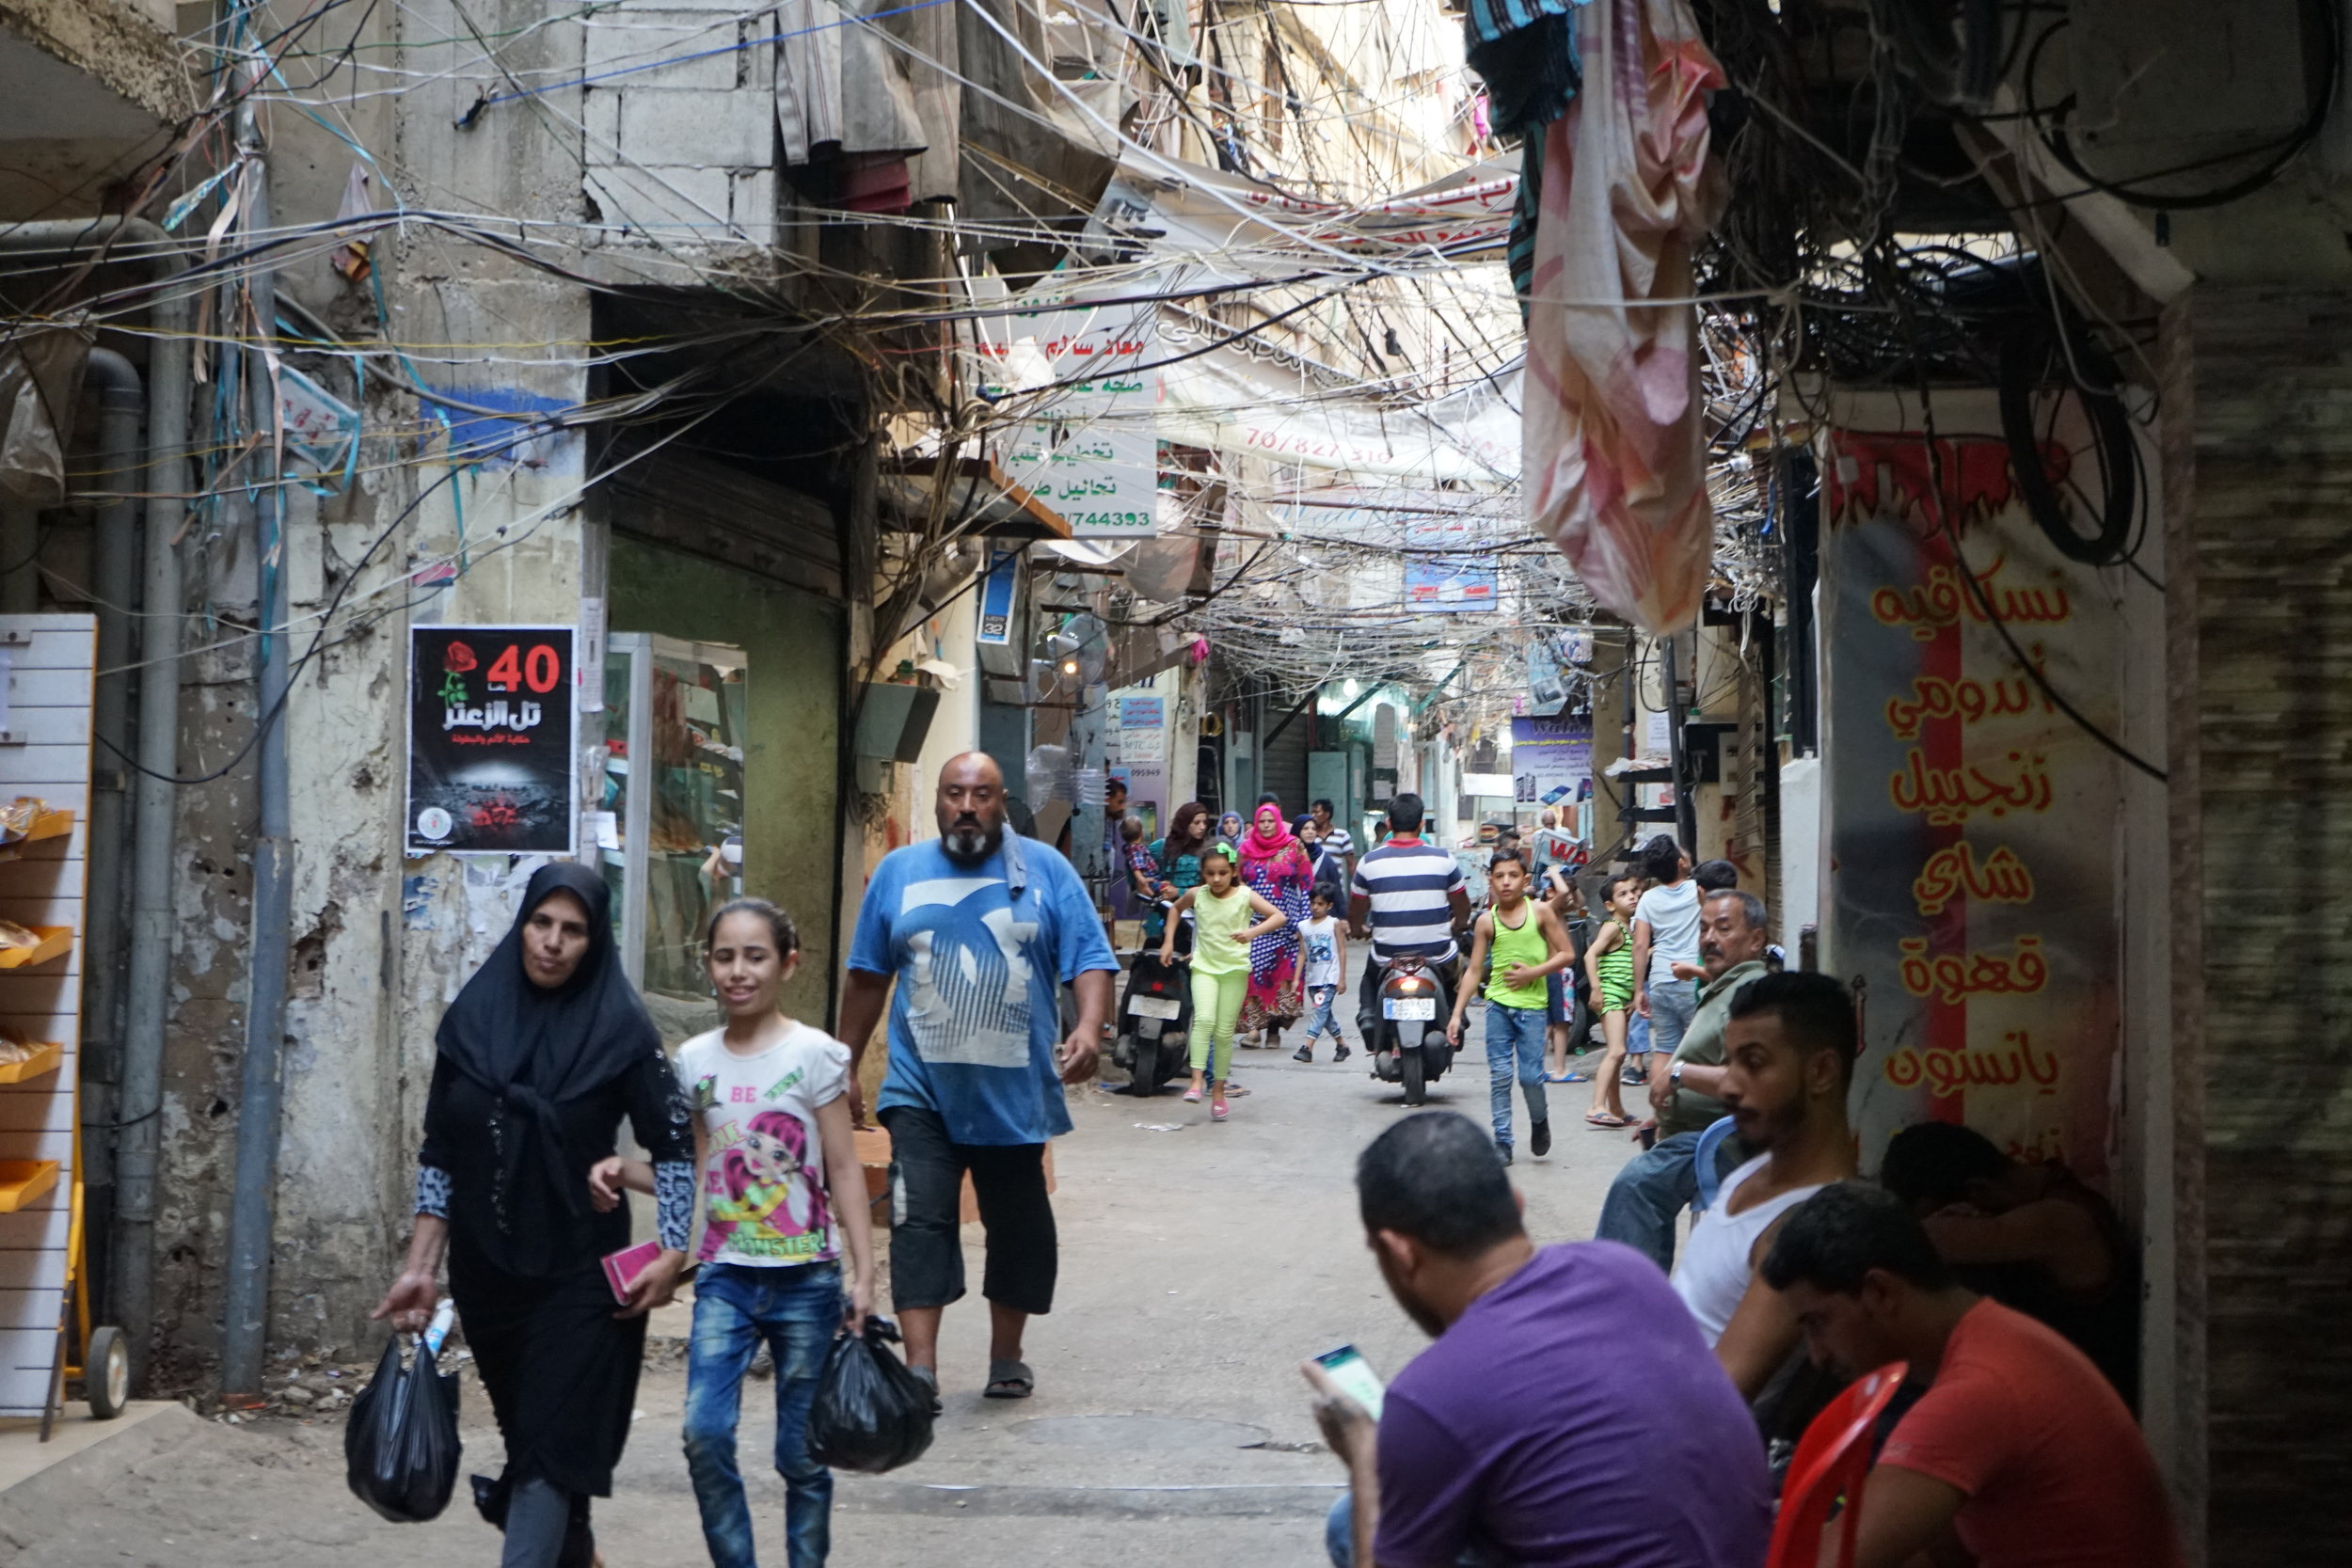  Residents walk through the streets of Sabra and Shatila on August 18, 2016. 